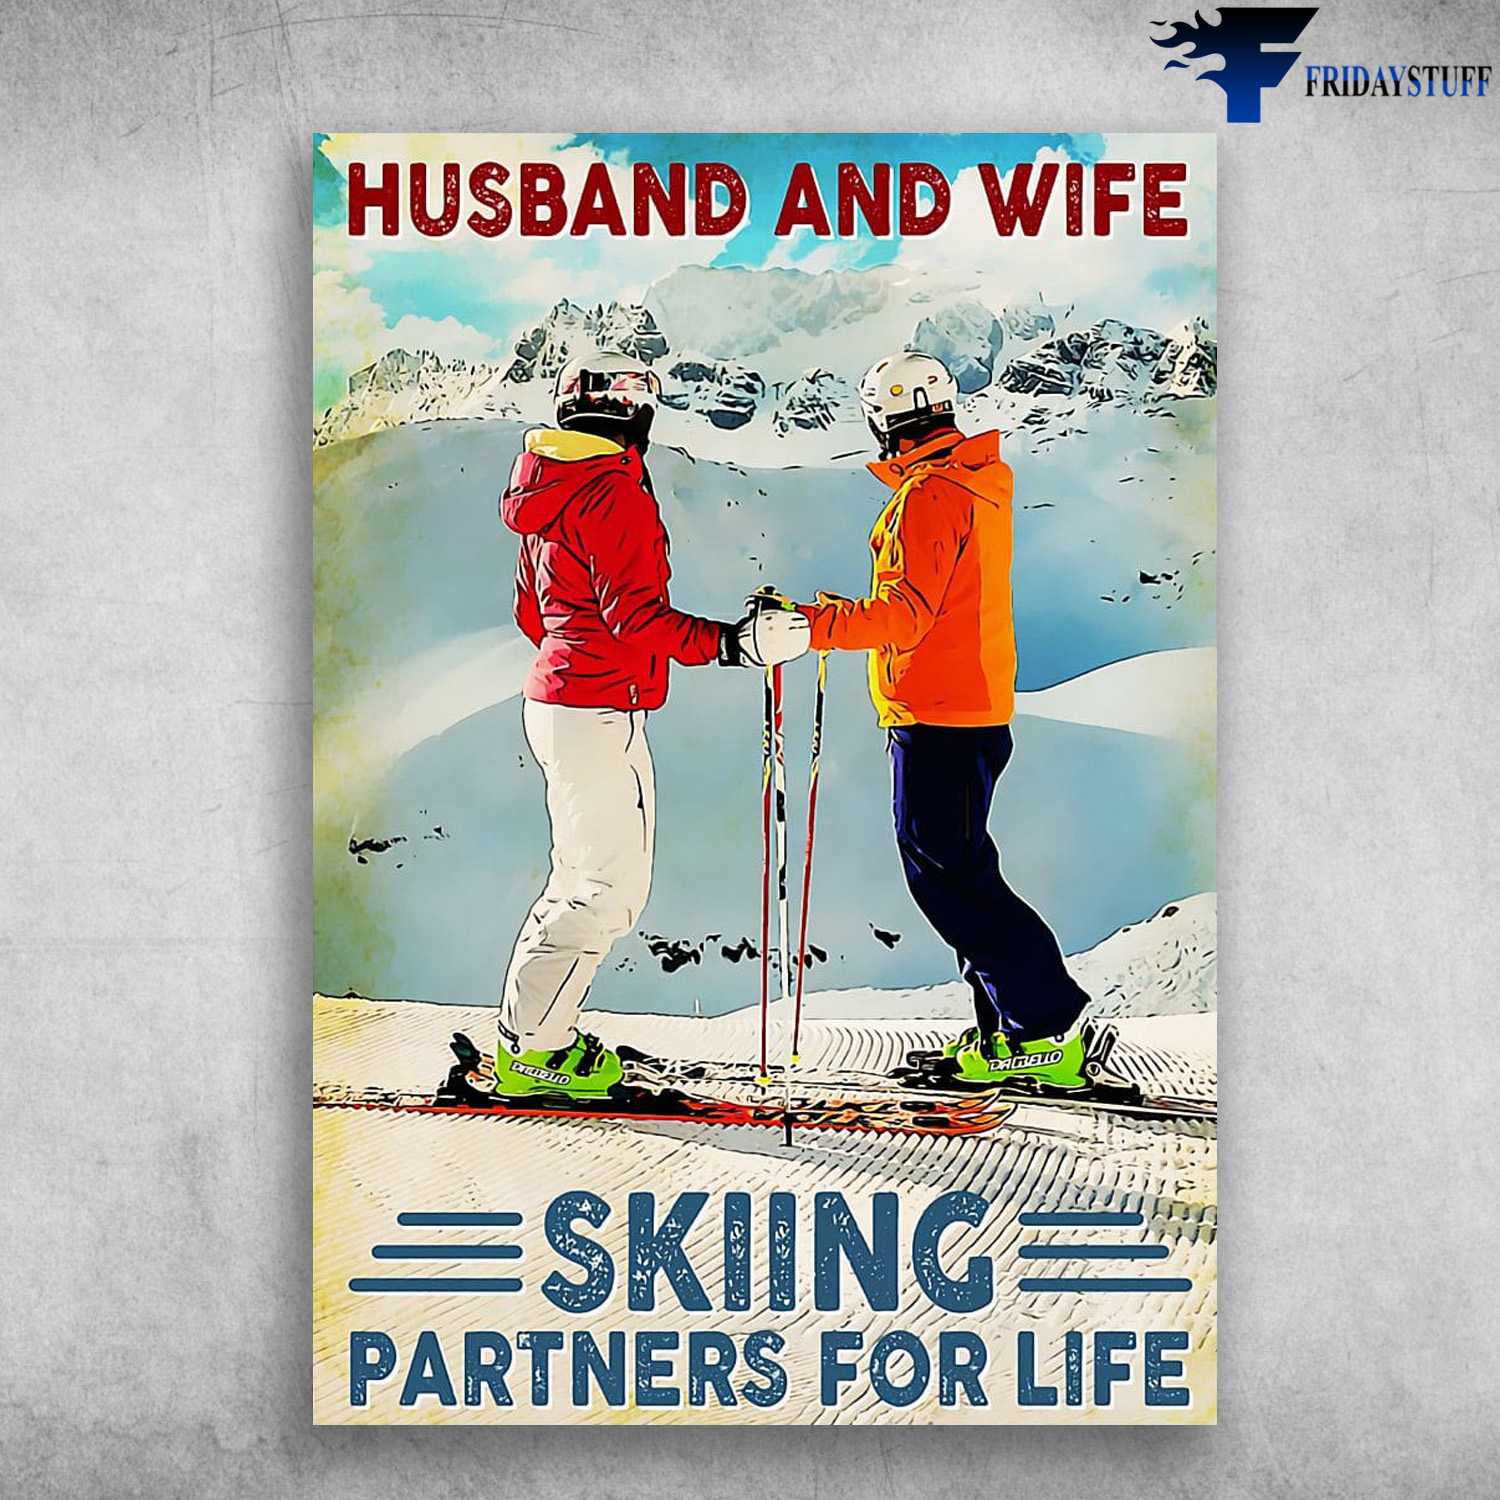 Skiing Poster, Husband And WIfe, Skiing Partners For Life